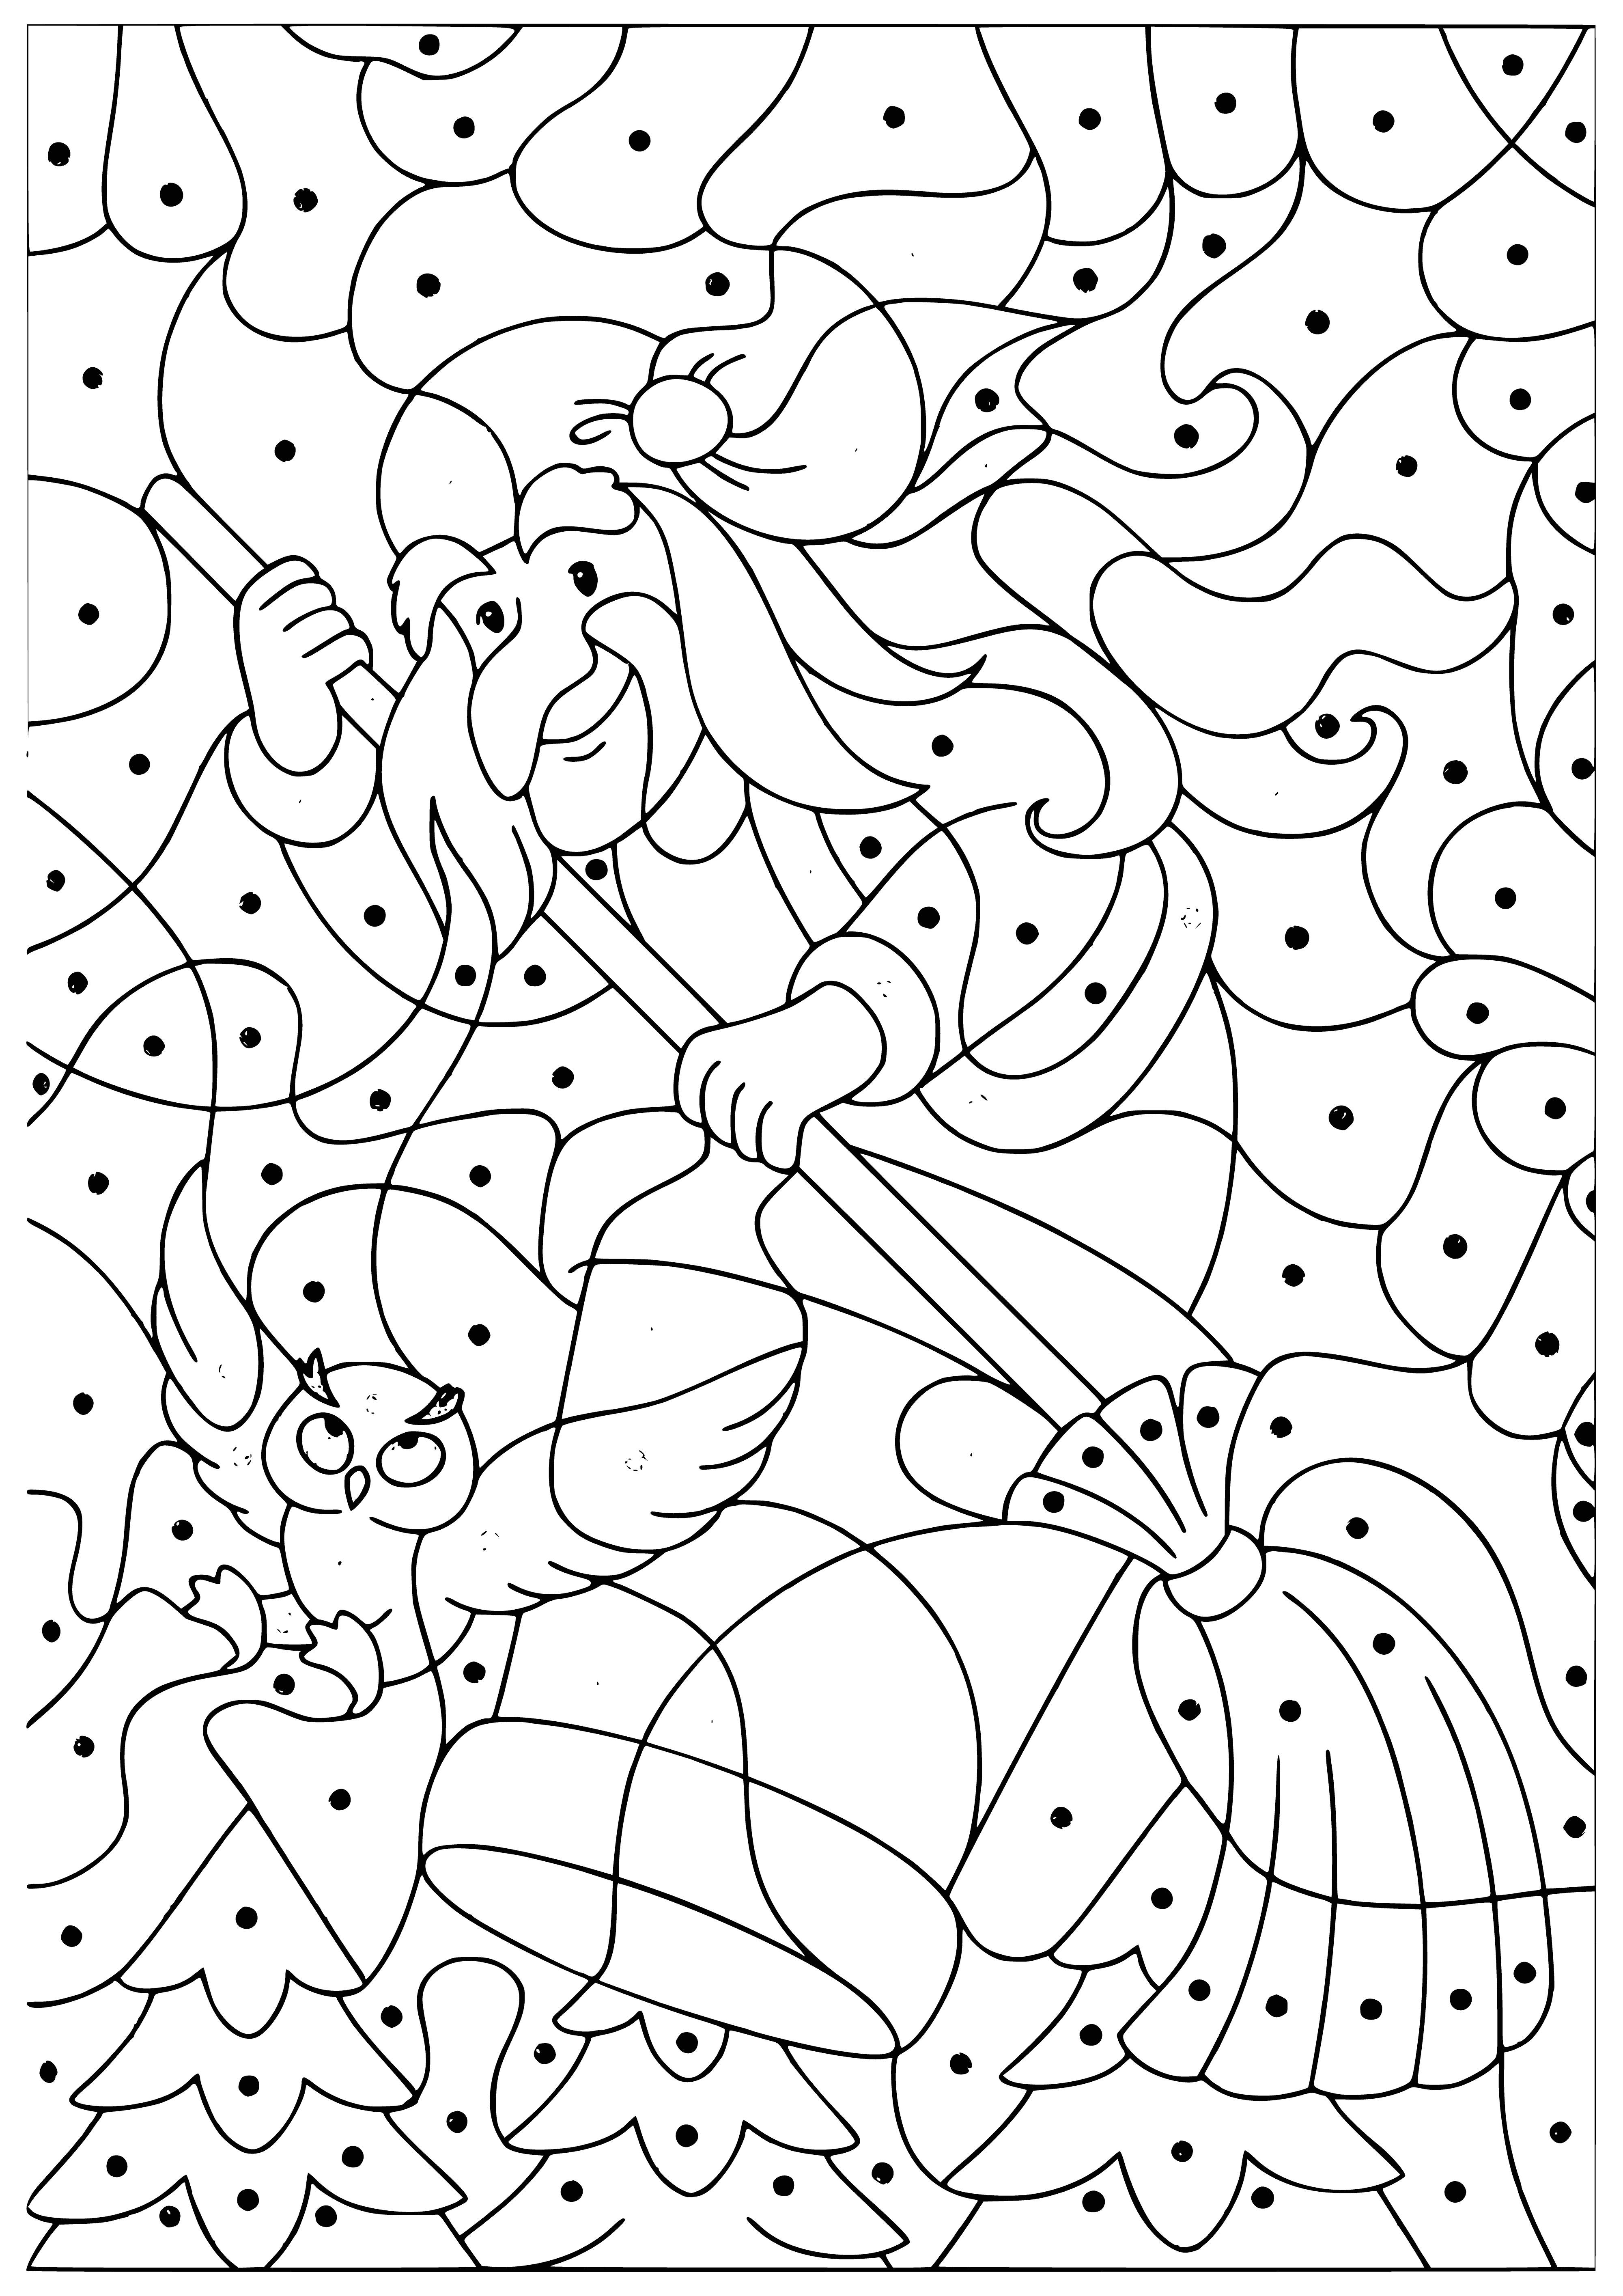 coloring page: A tall, thin woman stands in front of a small hut w/ chicken legs, wearing a blue dress & hat, a staff with a skull on top; a small fire burns.